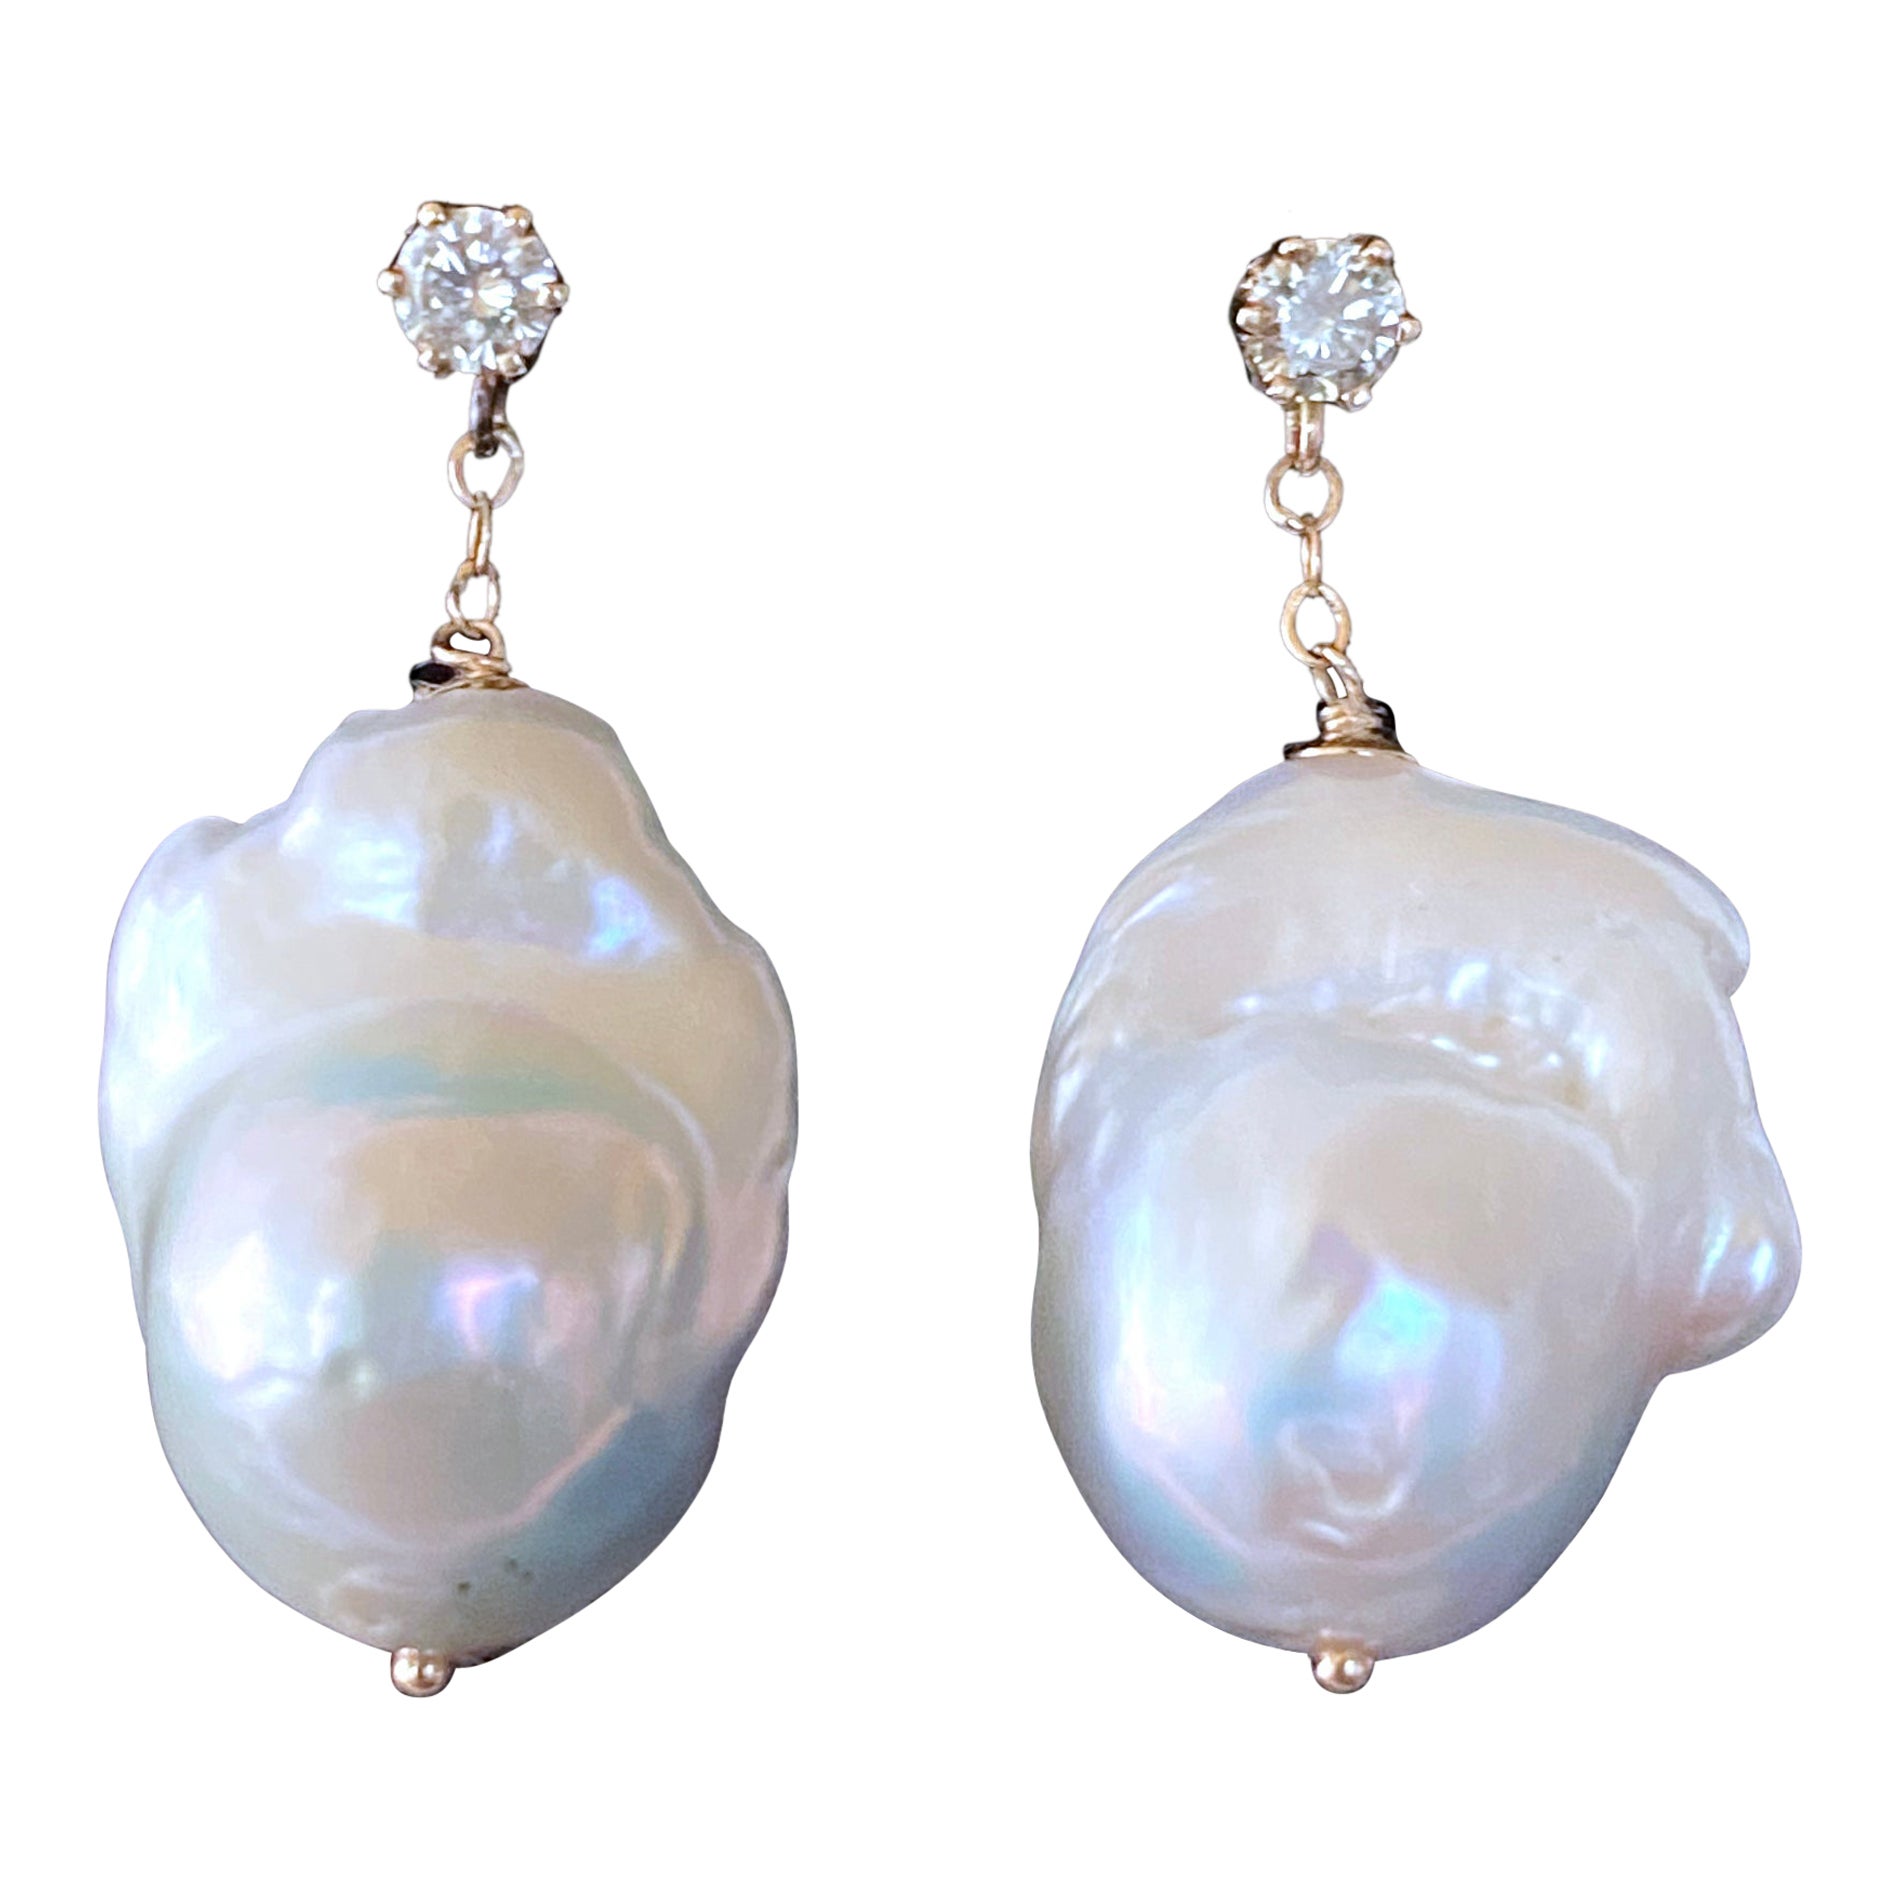 Marina J. Diamond Studded Pearl Earrings with 14k Solid Gold